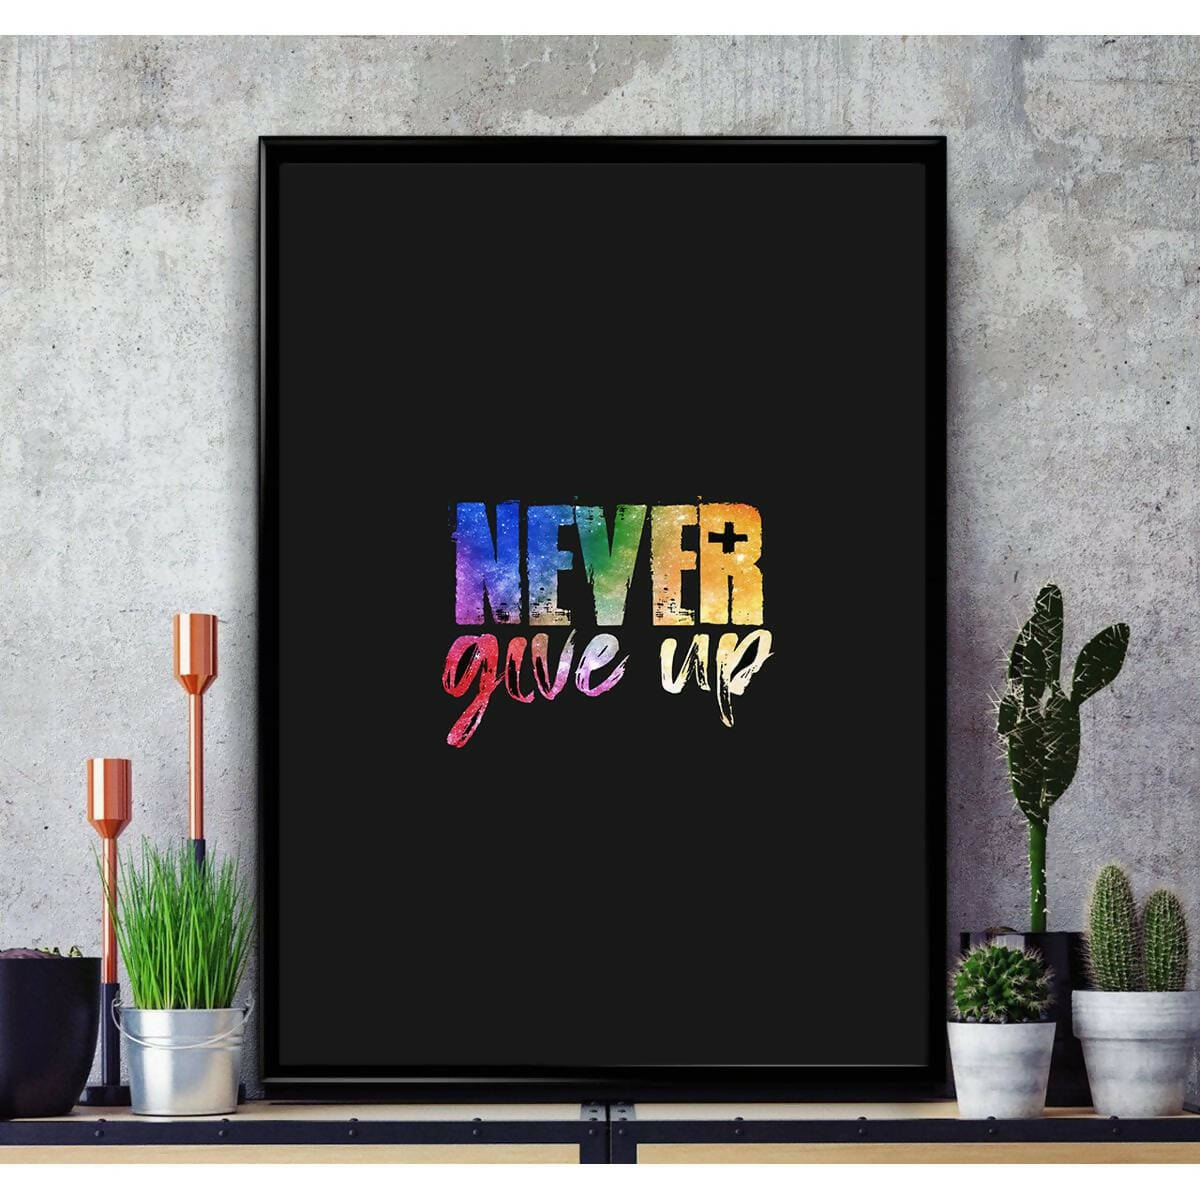 Never Give Up Quotes Poster Wall Hanging Glass Photo Frame in Premium Glossy Photo Paper A4 8x12” size for Home Decor and Decoration Accessories